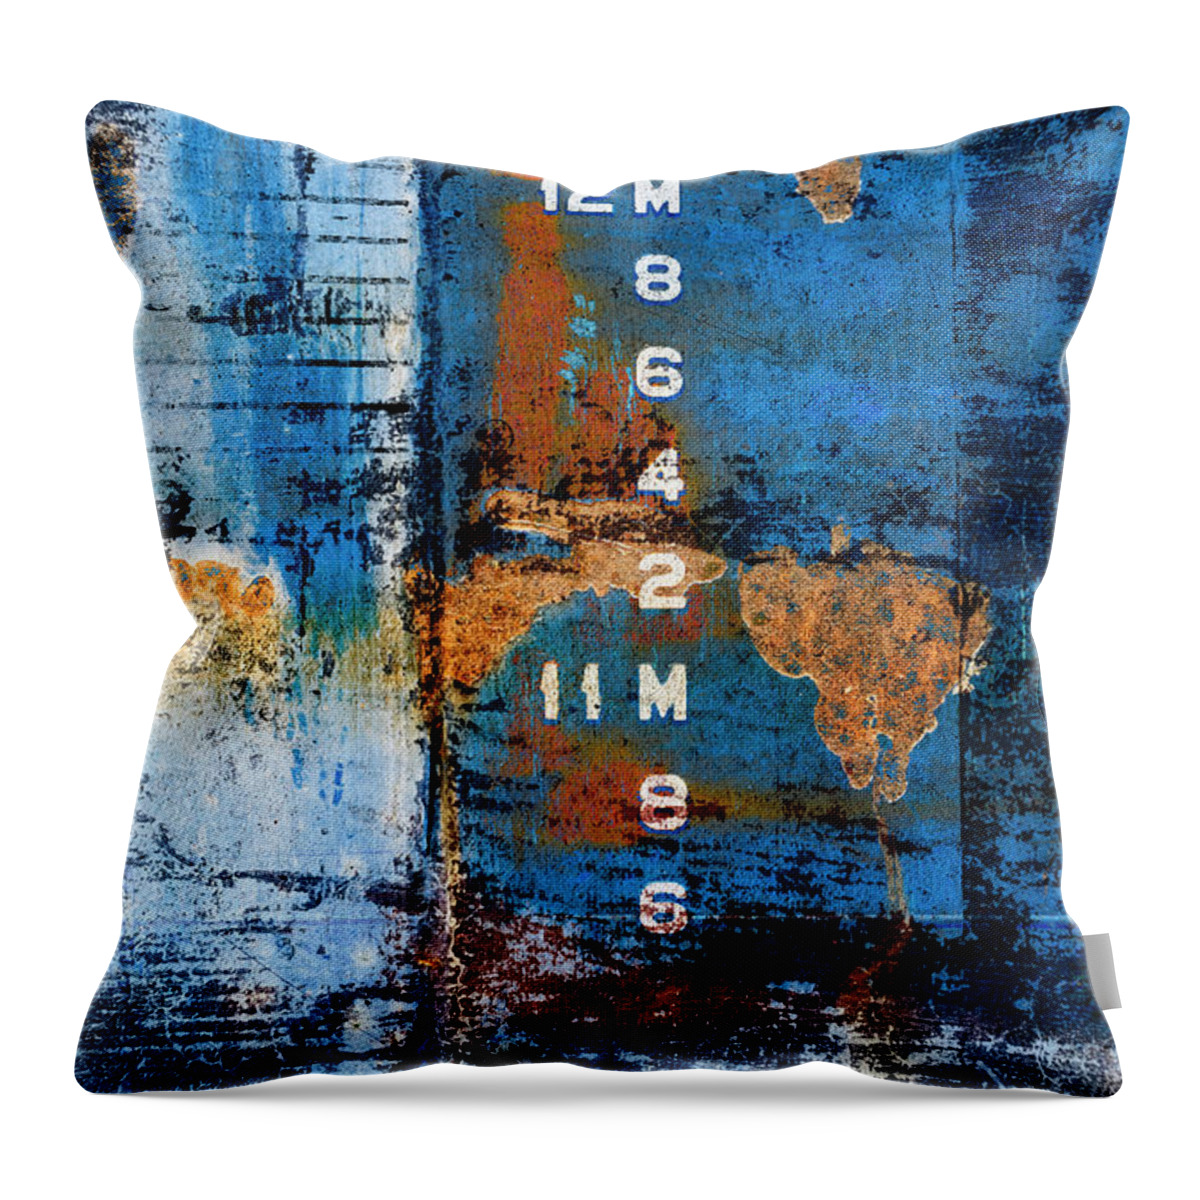 Drydock Throw Pillow featuring the mixed media Drydock by Carol Leigh